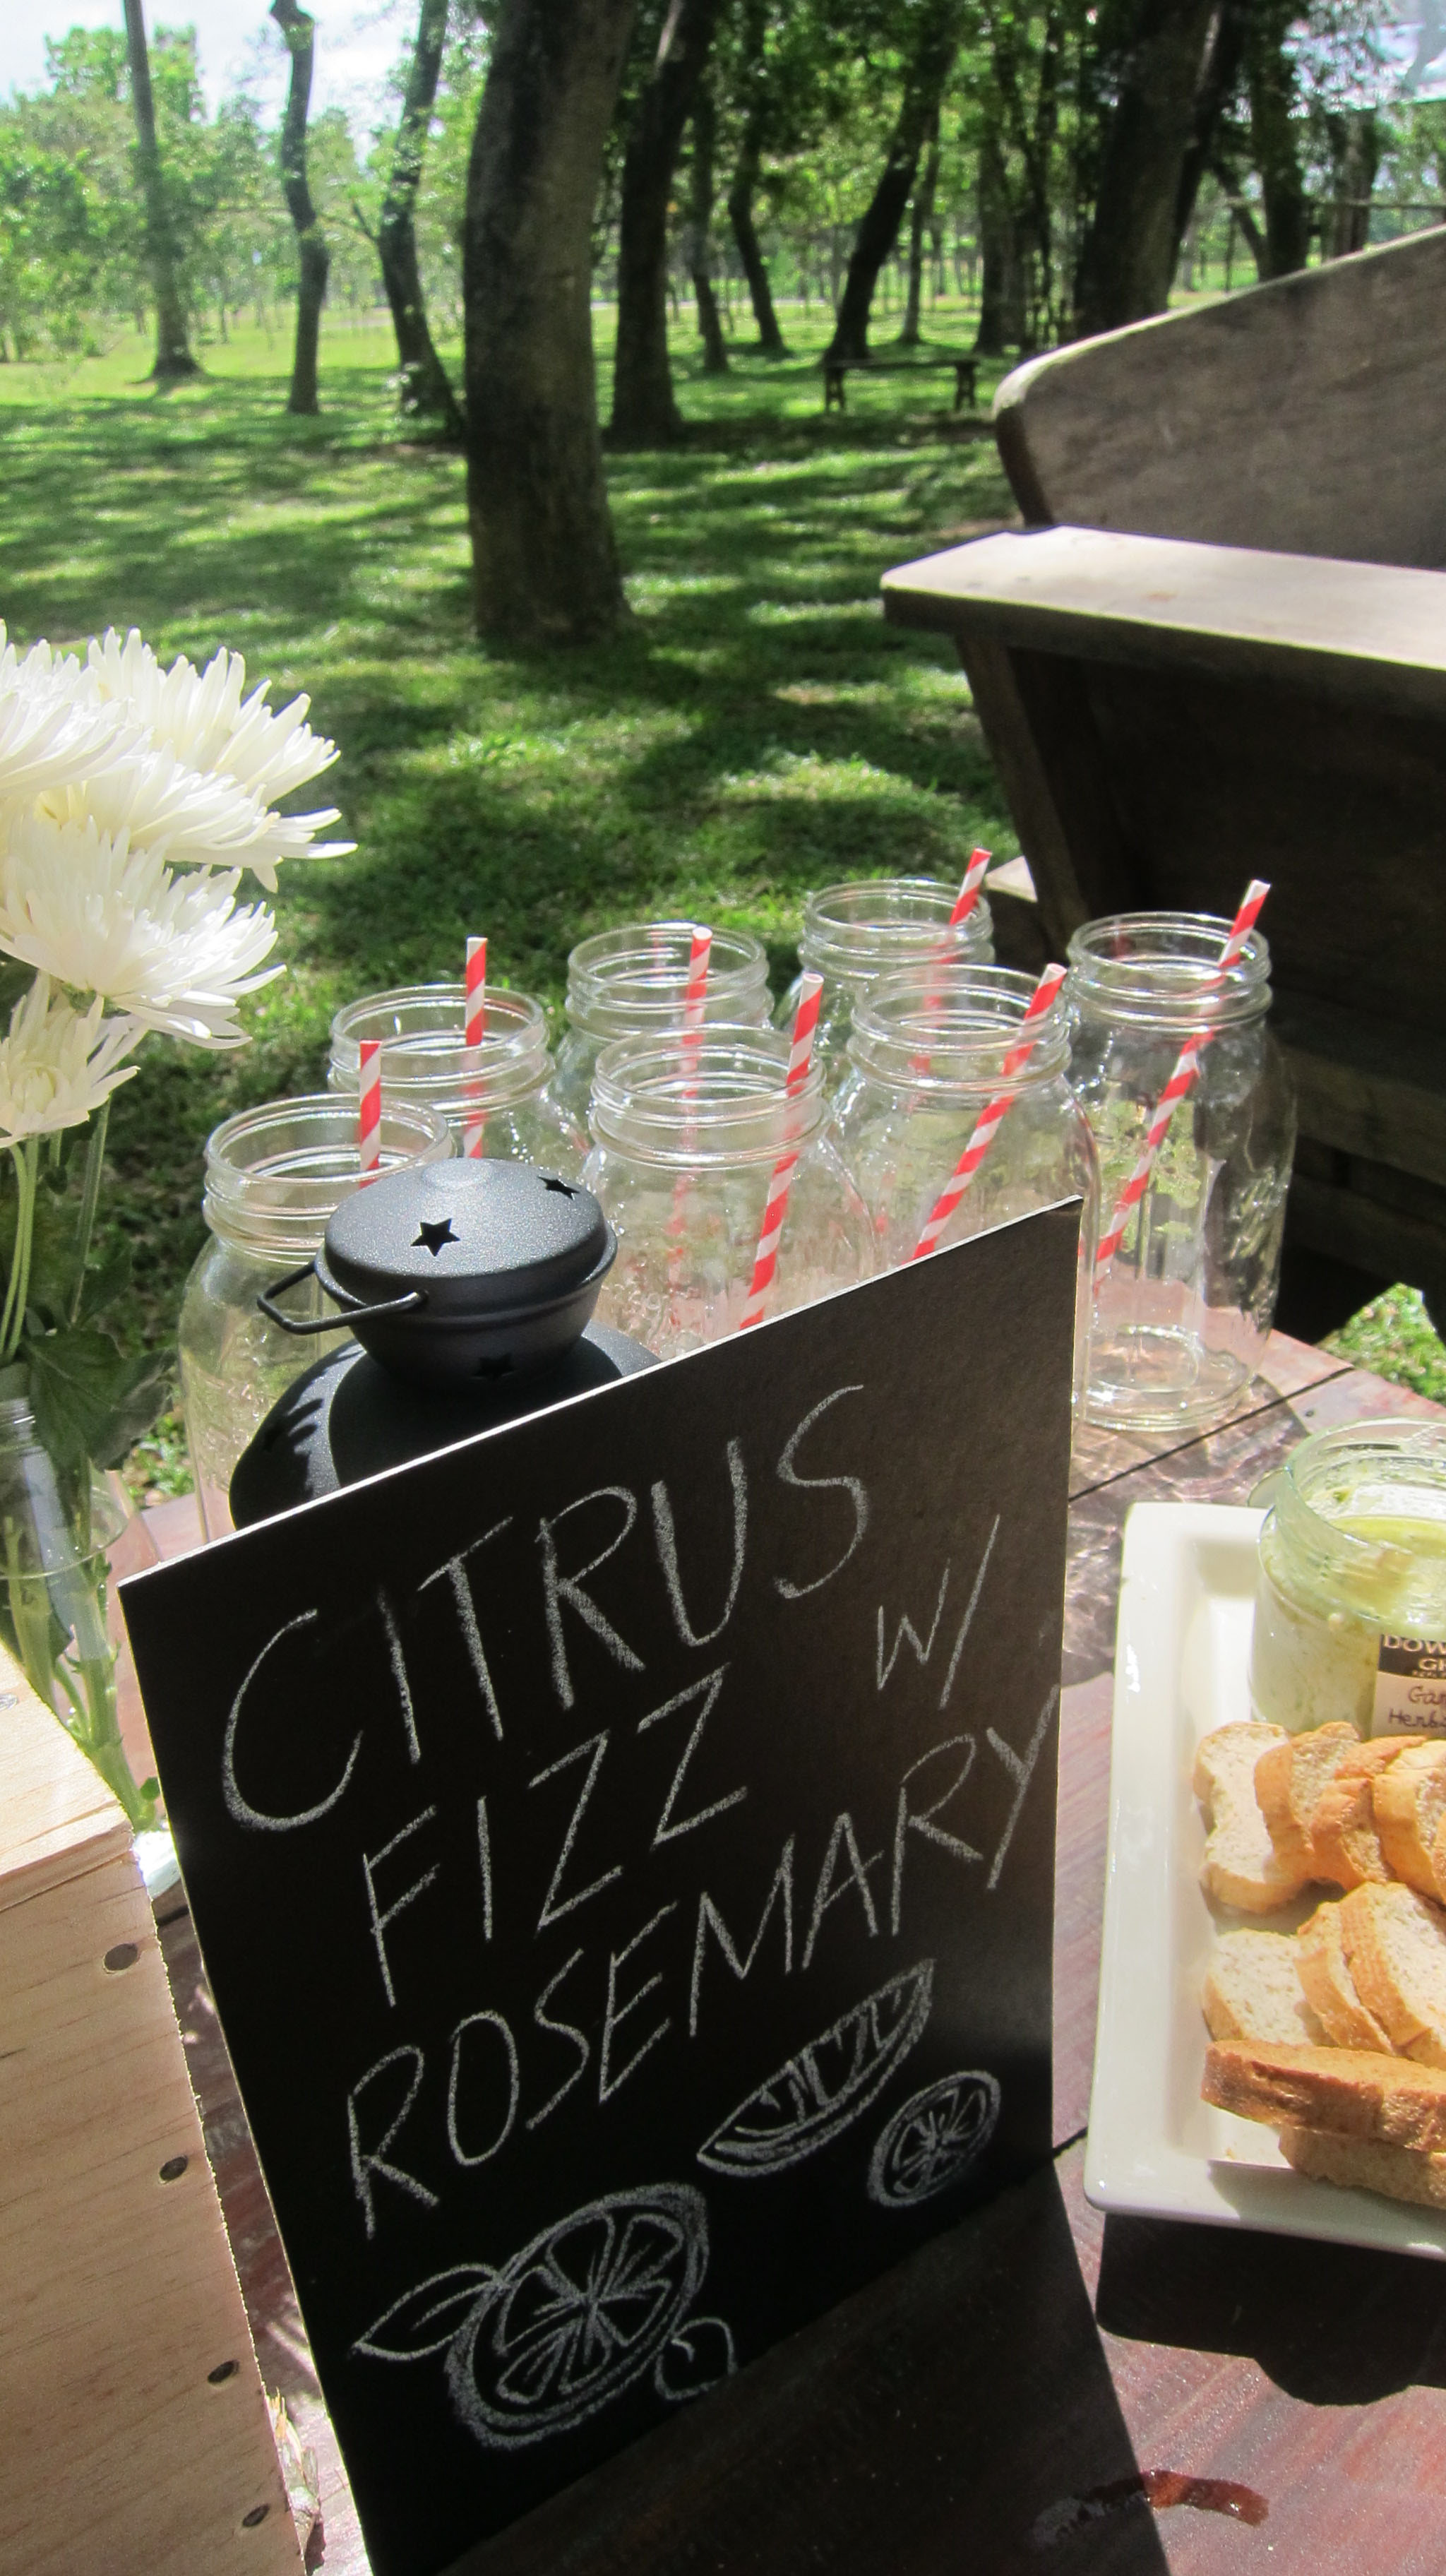 Citrus Fizz with Rosemary